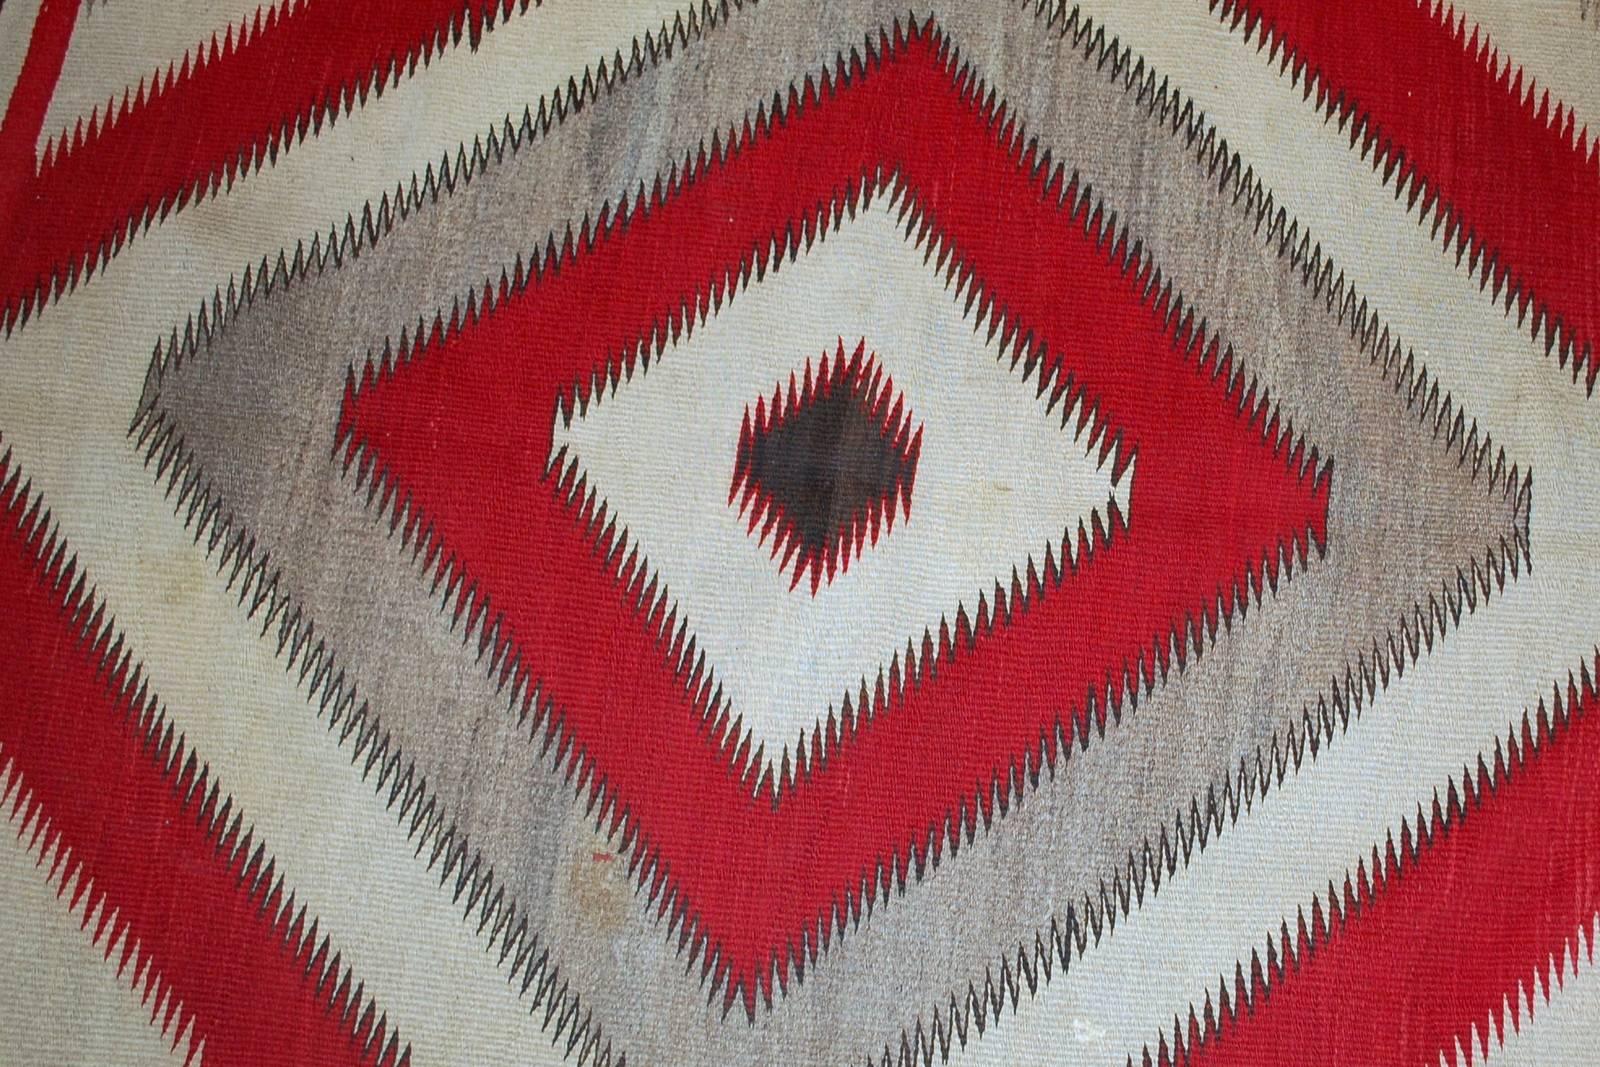 Antique handwoven American-Indian Navajo rug in original great condition. The rug is in three colors with geometric zooming diamond shaped medallion in red, white and gray shades. Very symmetric modern look. Beautiful piece will go very well with